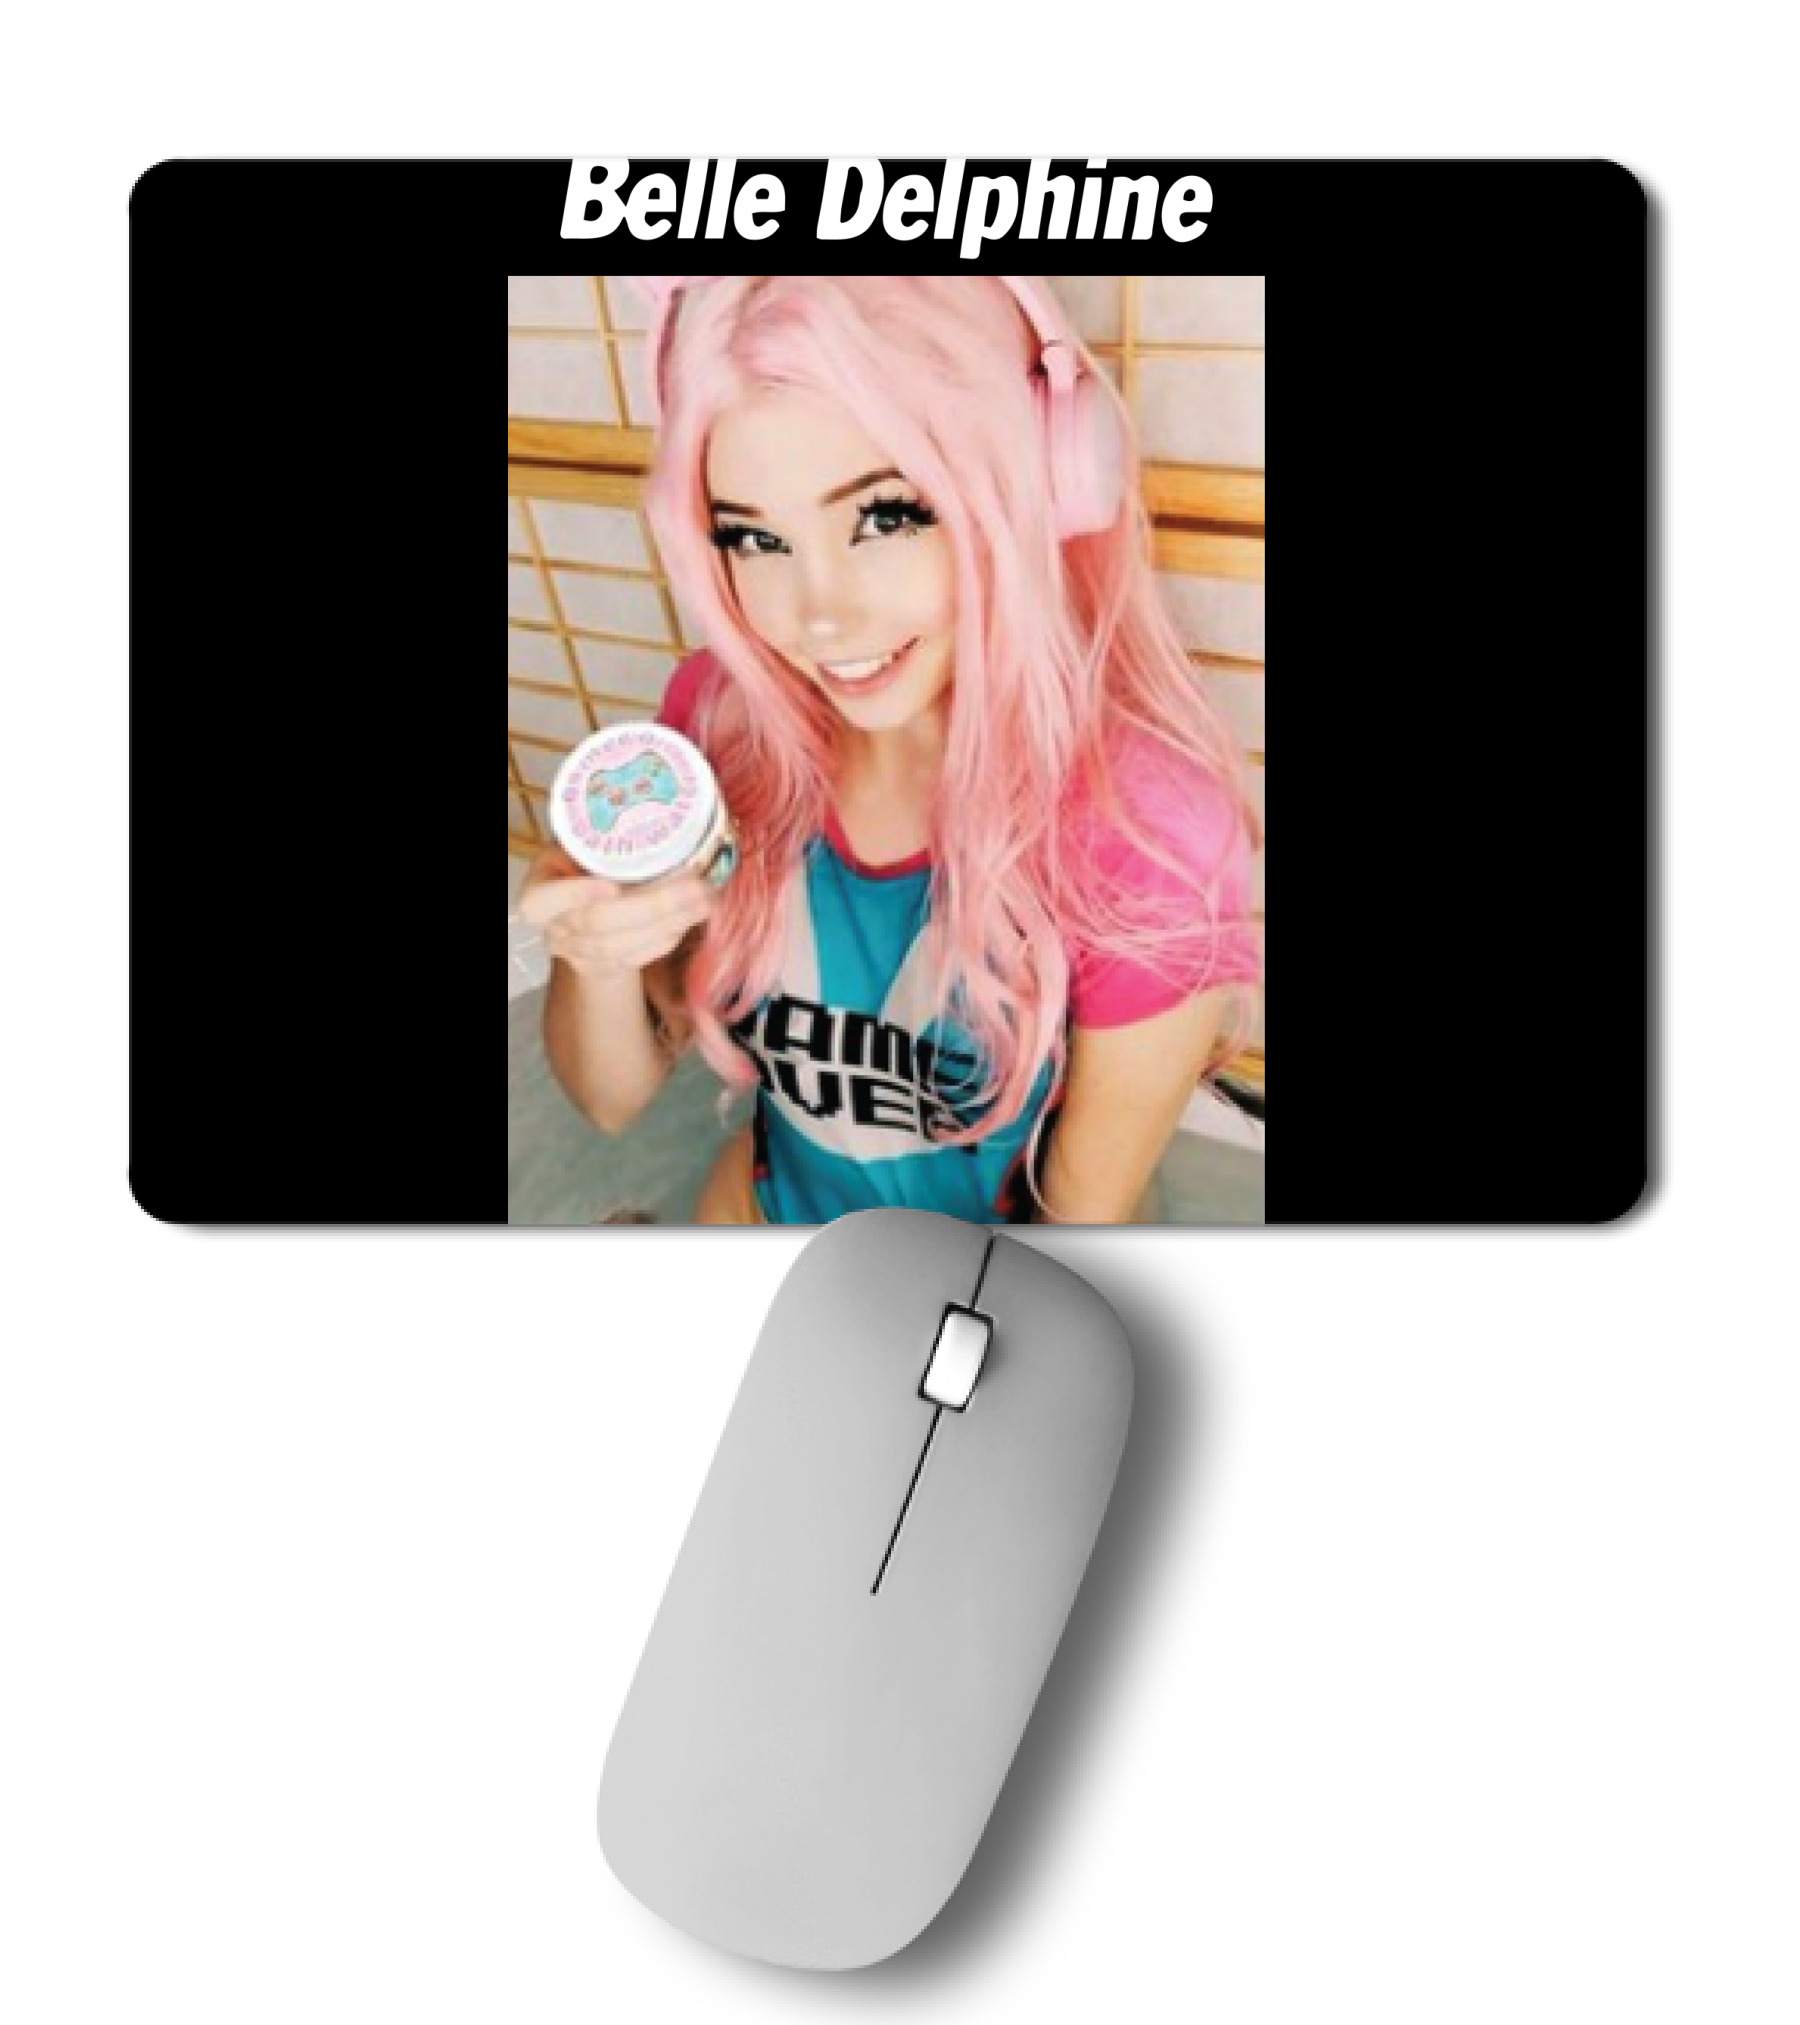 daryl jenkins recommends belle delphine mouse pad pic